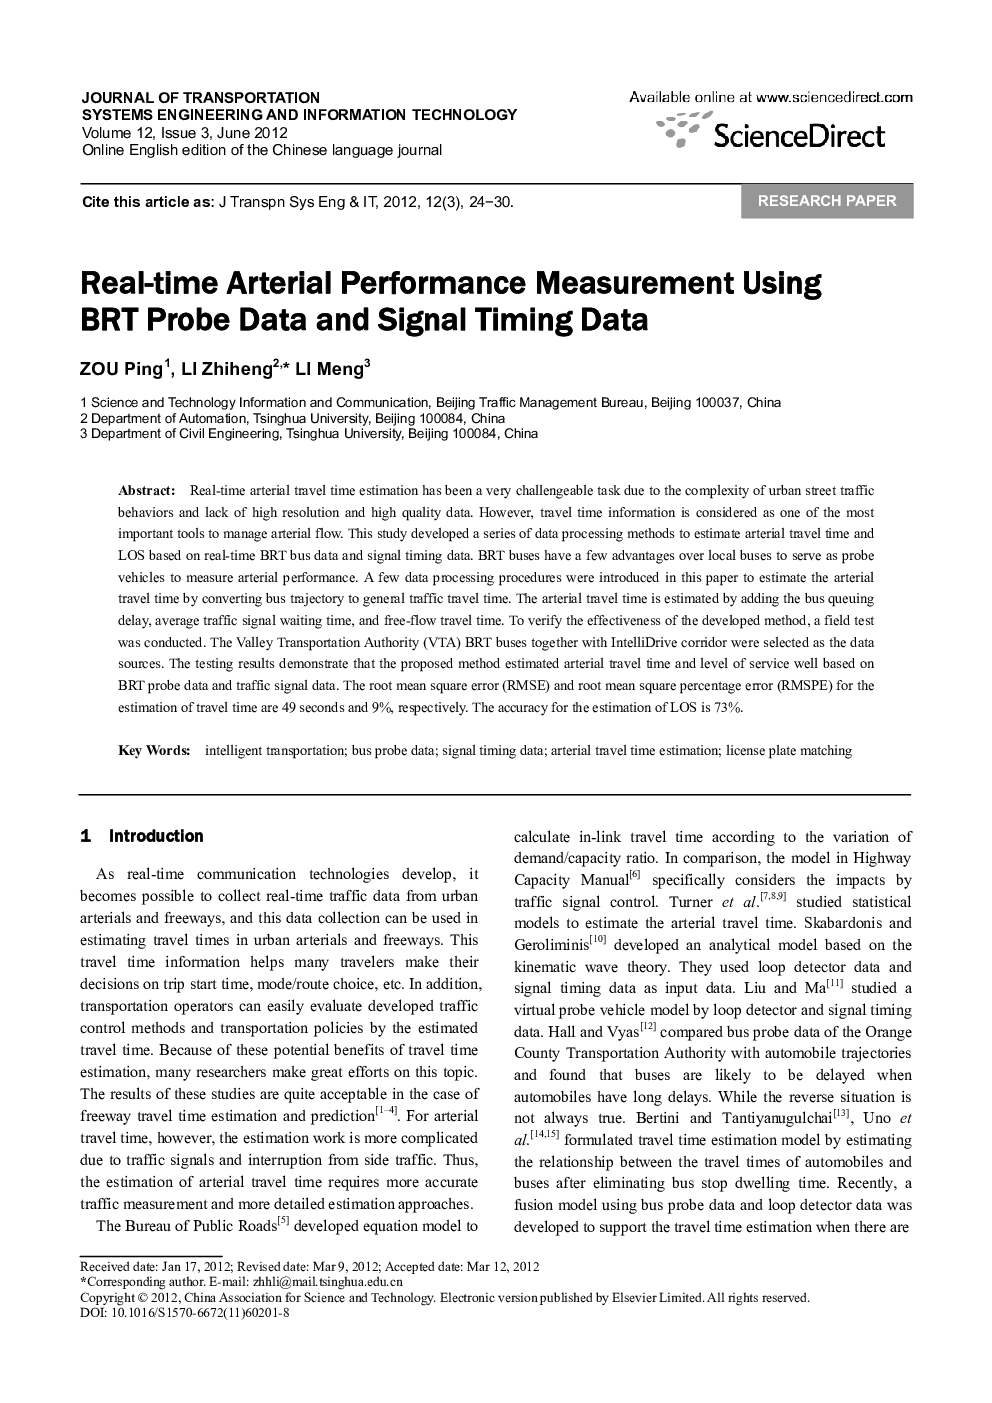 Real-time Arterial Performance Measurement Using BRT Probe Data and Signal Timing Data